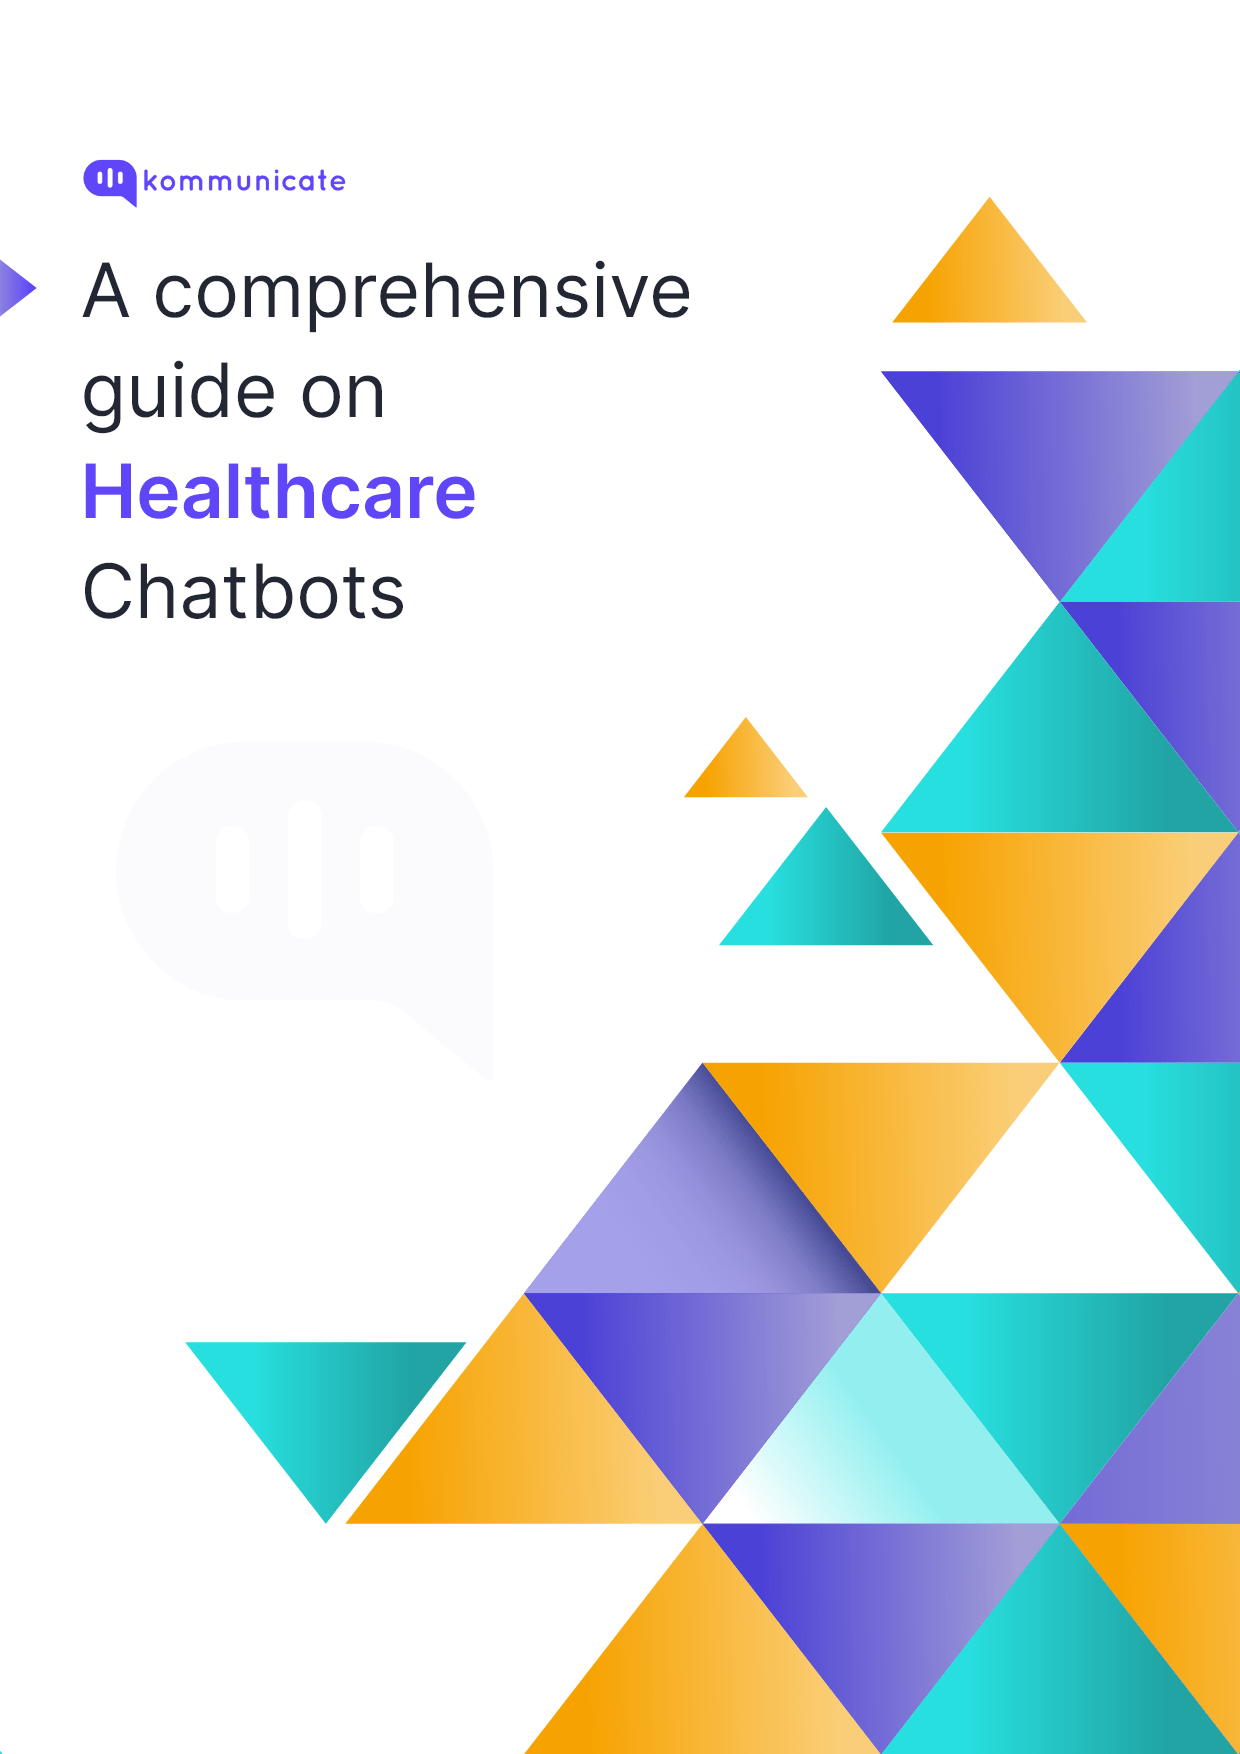 A comprehensive guide on Healthcare Chatbots